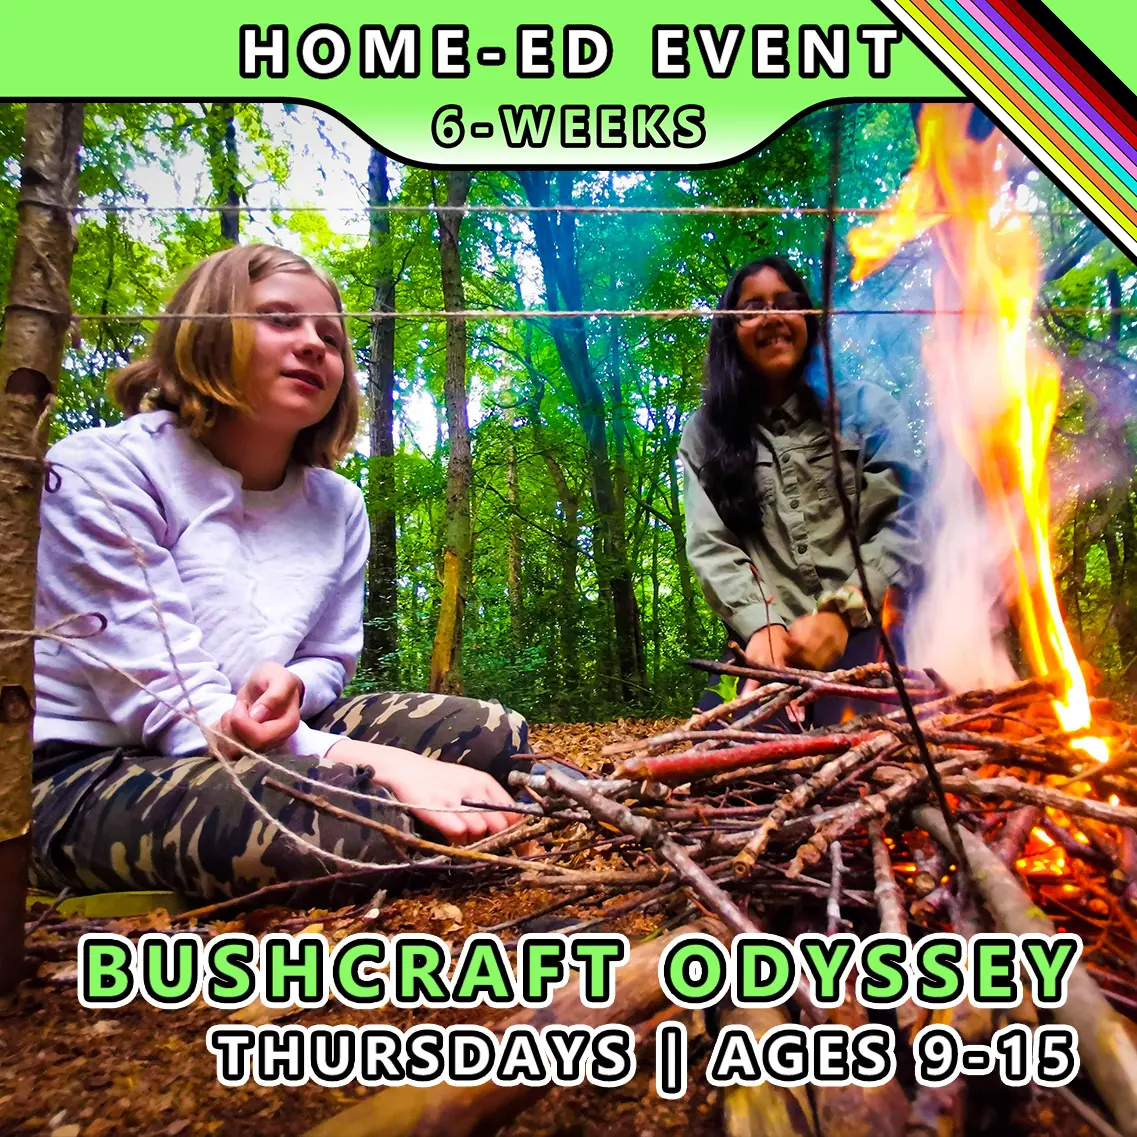 Bushcraft odyssey 2 course for home-ed children at TRIBE with honours